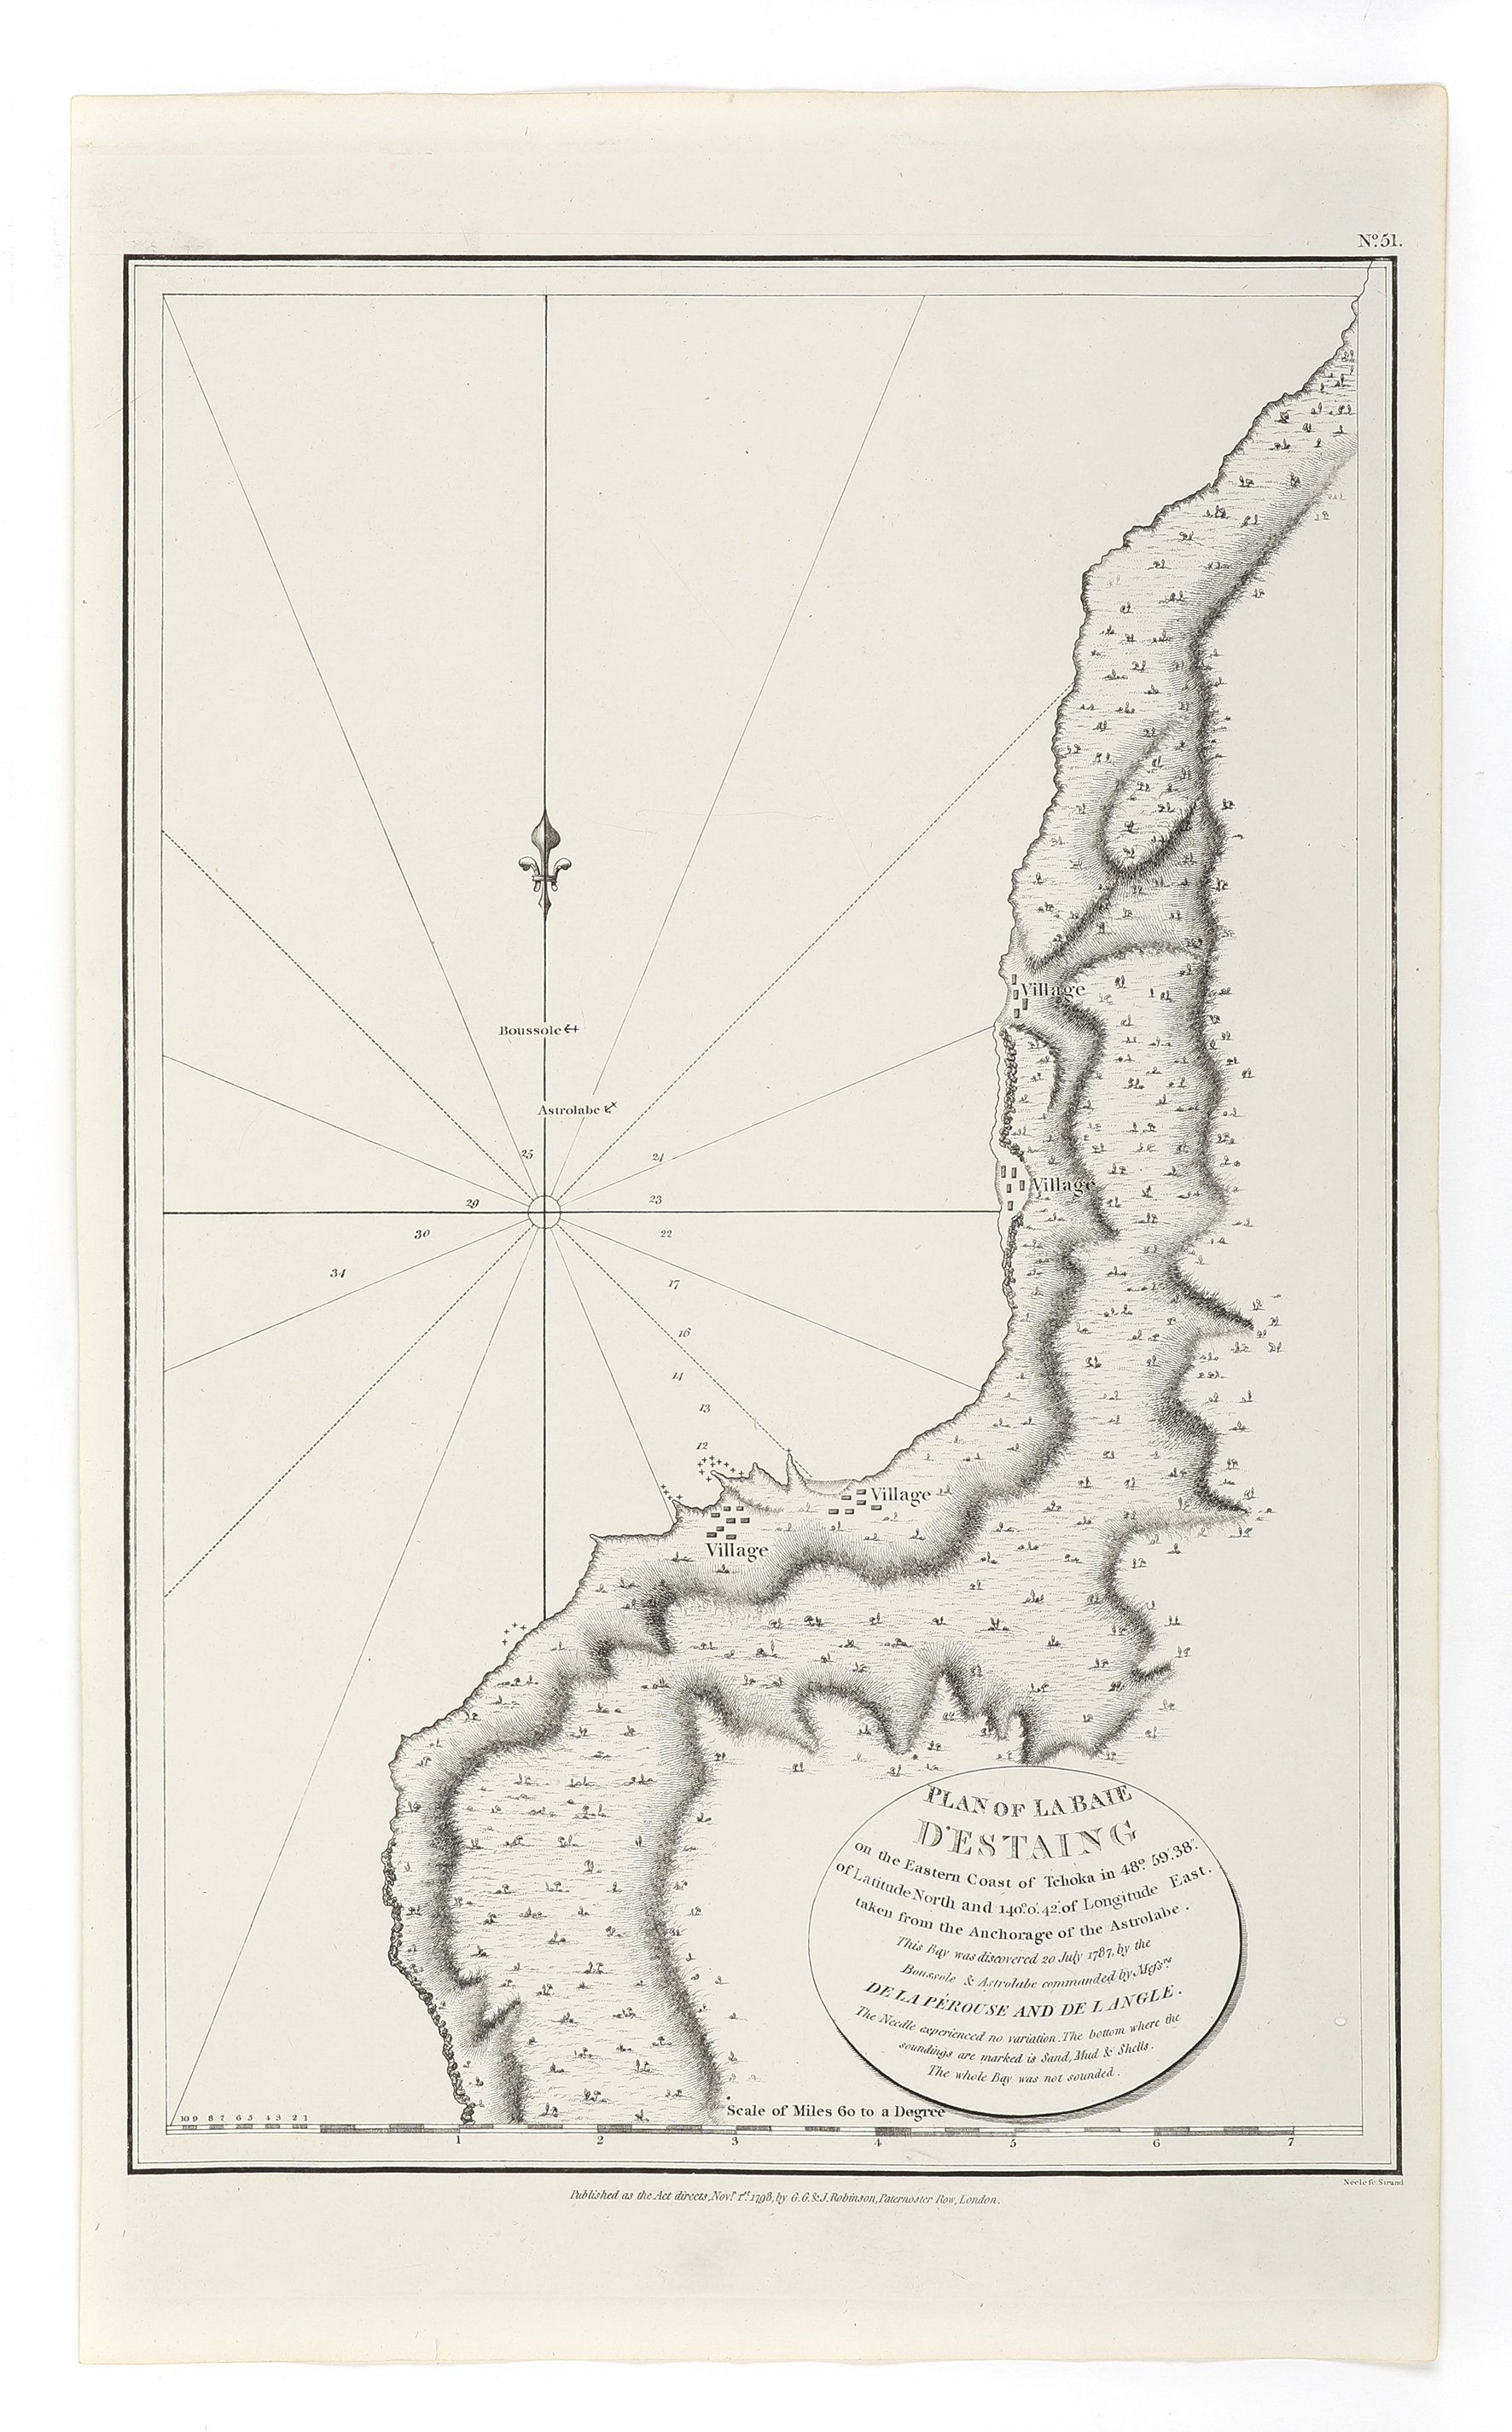 Plan of La Baie de d'Estaing on the Eastern Coast of Tehoka - Antique Map from 1798